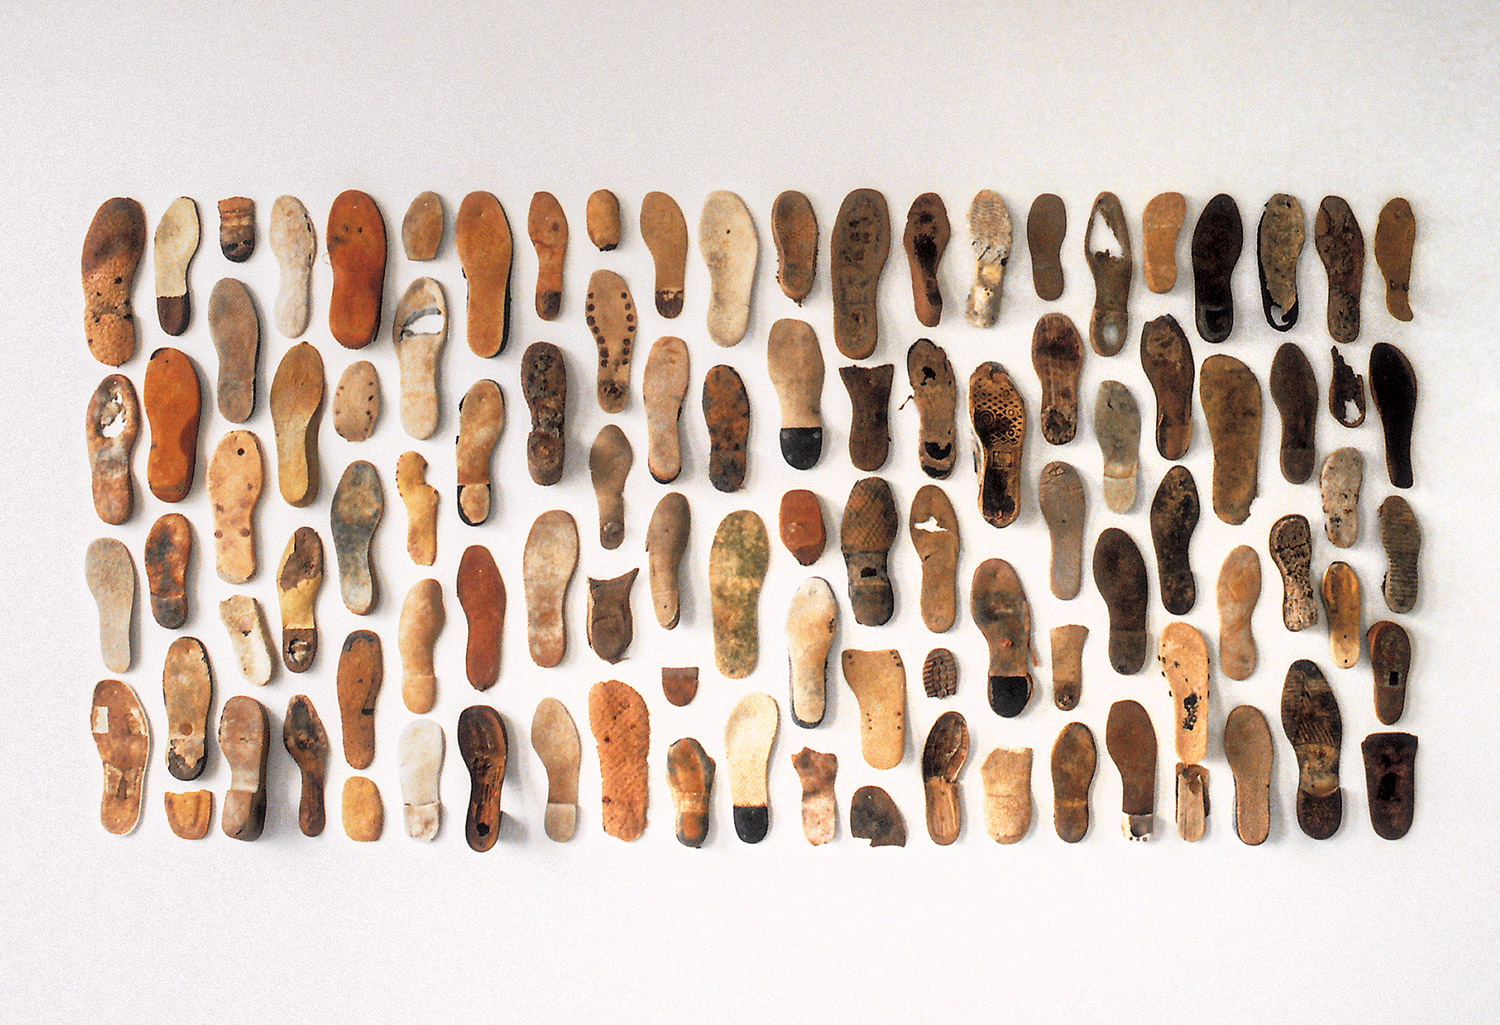 SOULS | 2,50 m x 1,20 m | shoe soles found at the beach in Italy and Greece  | Work by Sven Rünger & Ebi de Boer | Galerie Herold / Bremen | 1999